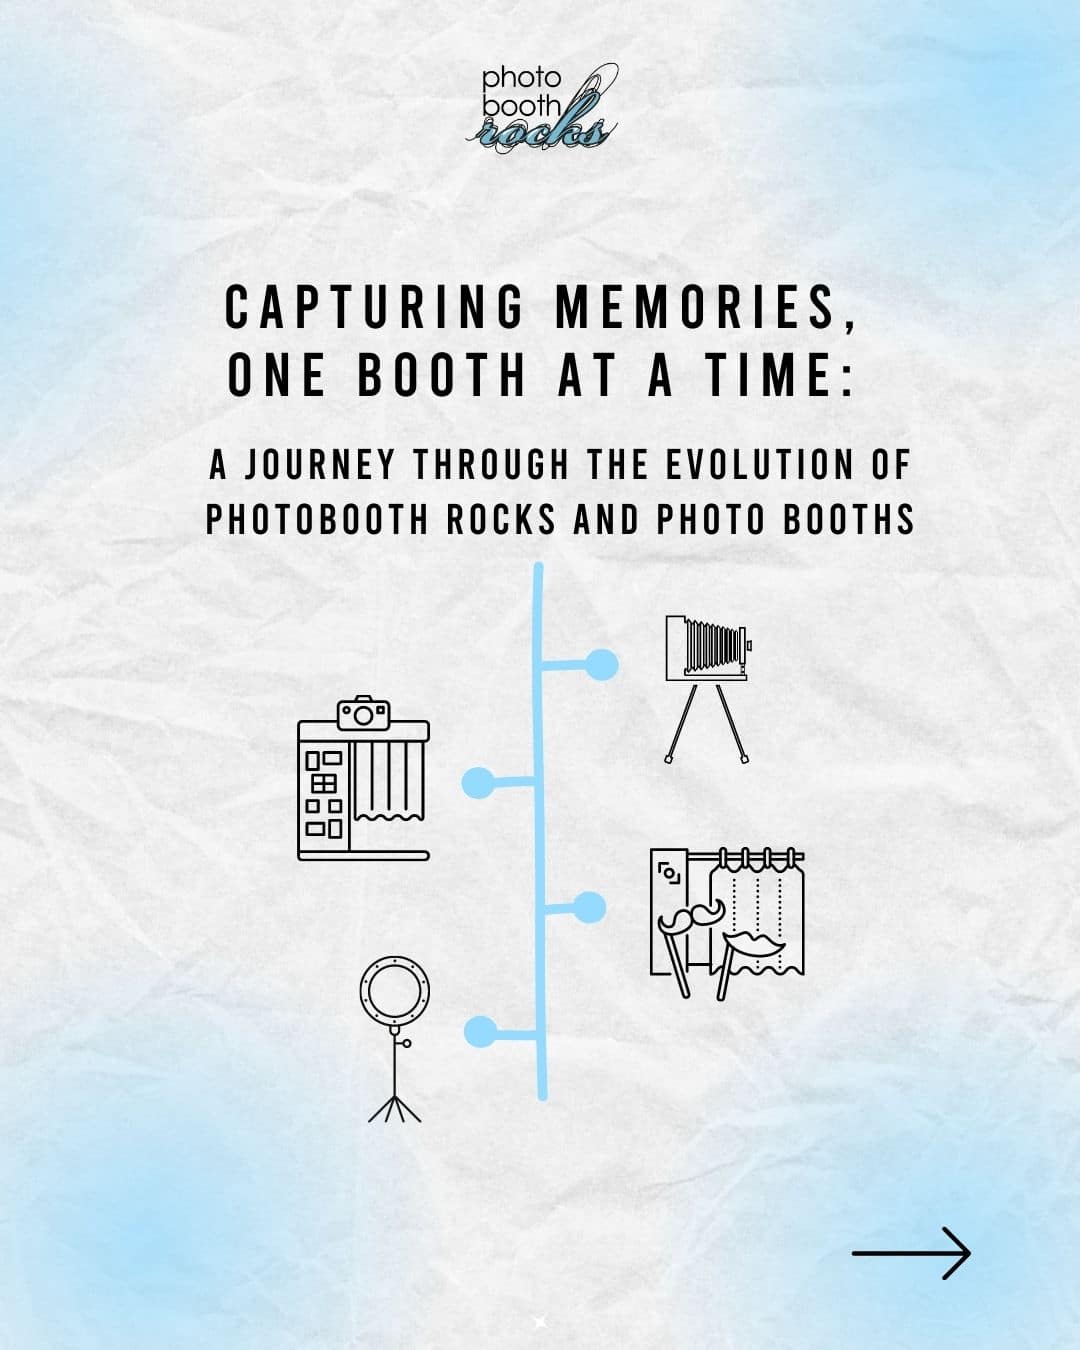 history of photo booths